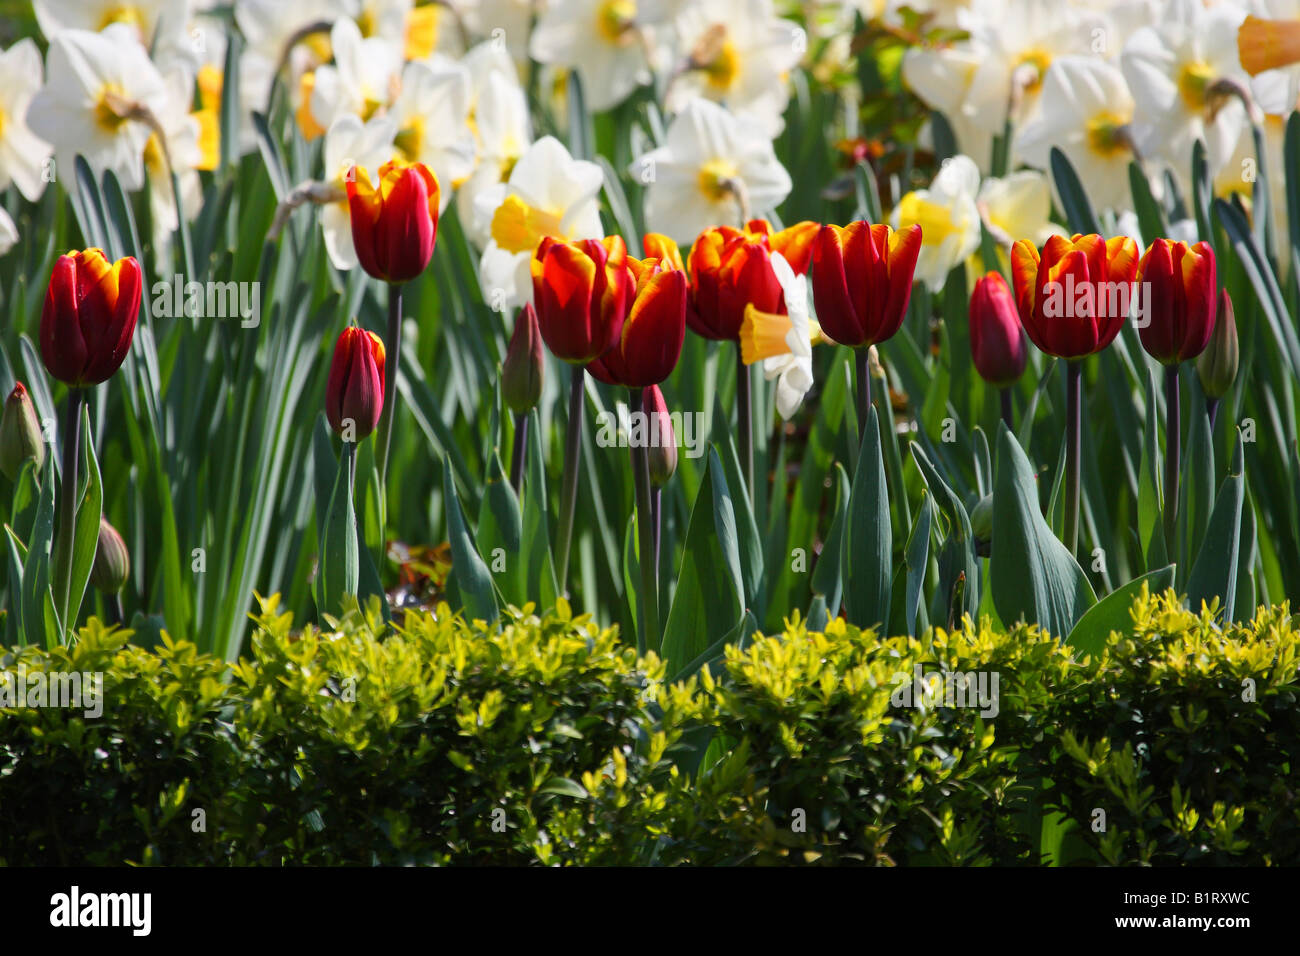 Orange tulips (Tulipa) and daffodils (Narcissus) with a green hedge in front Stock Photo